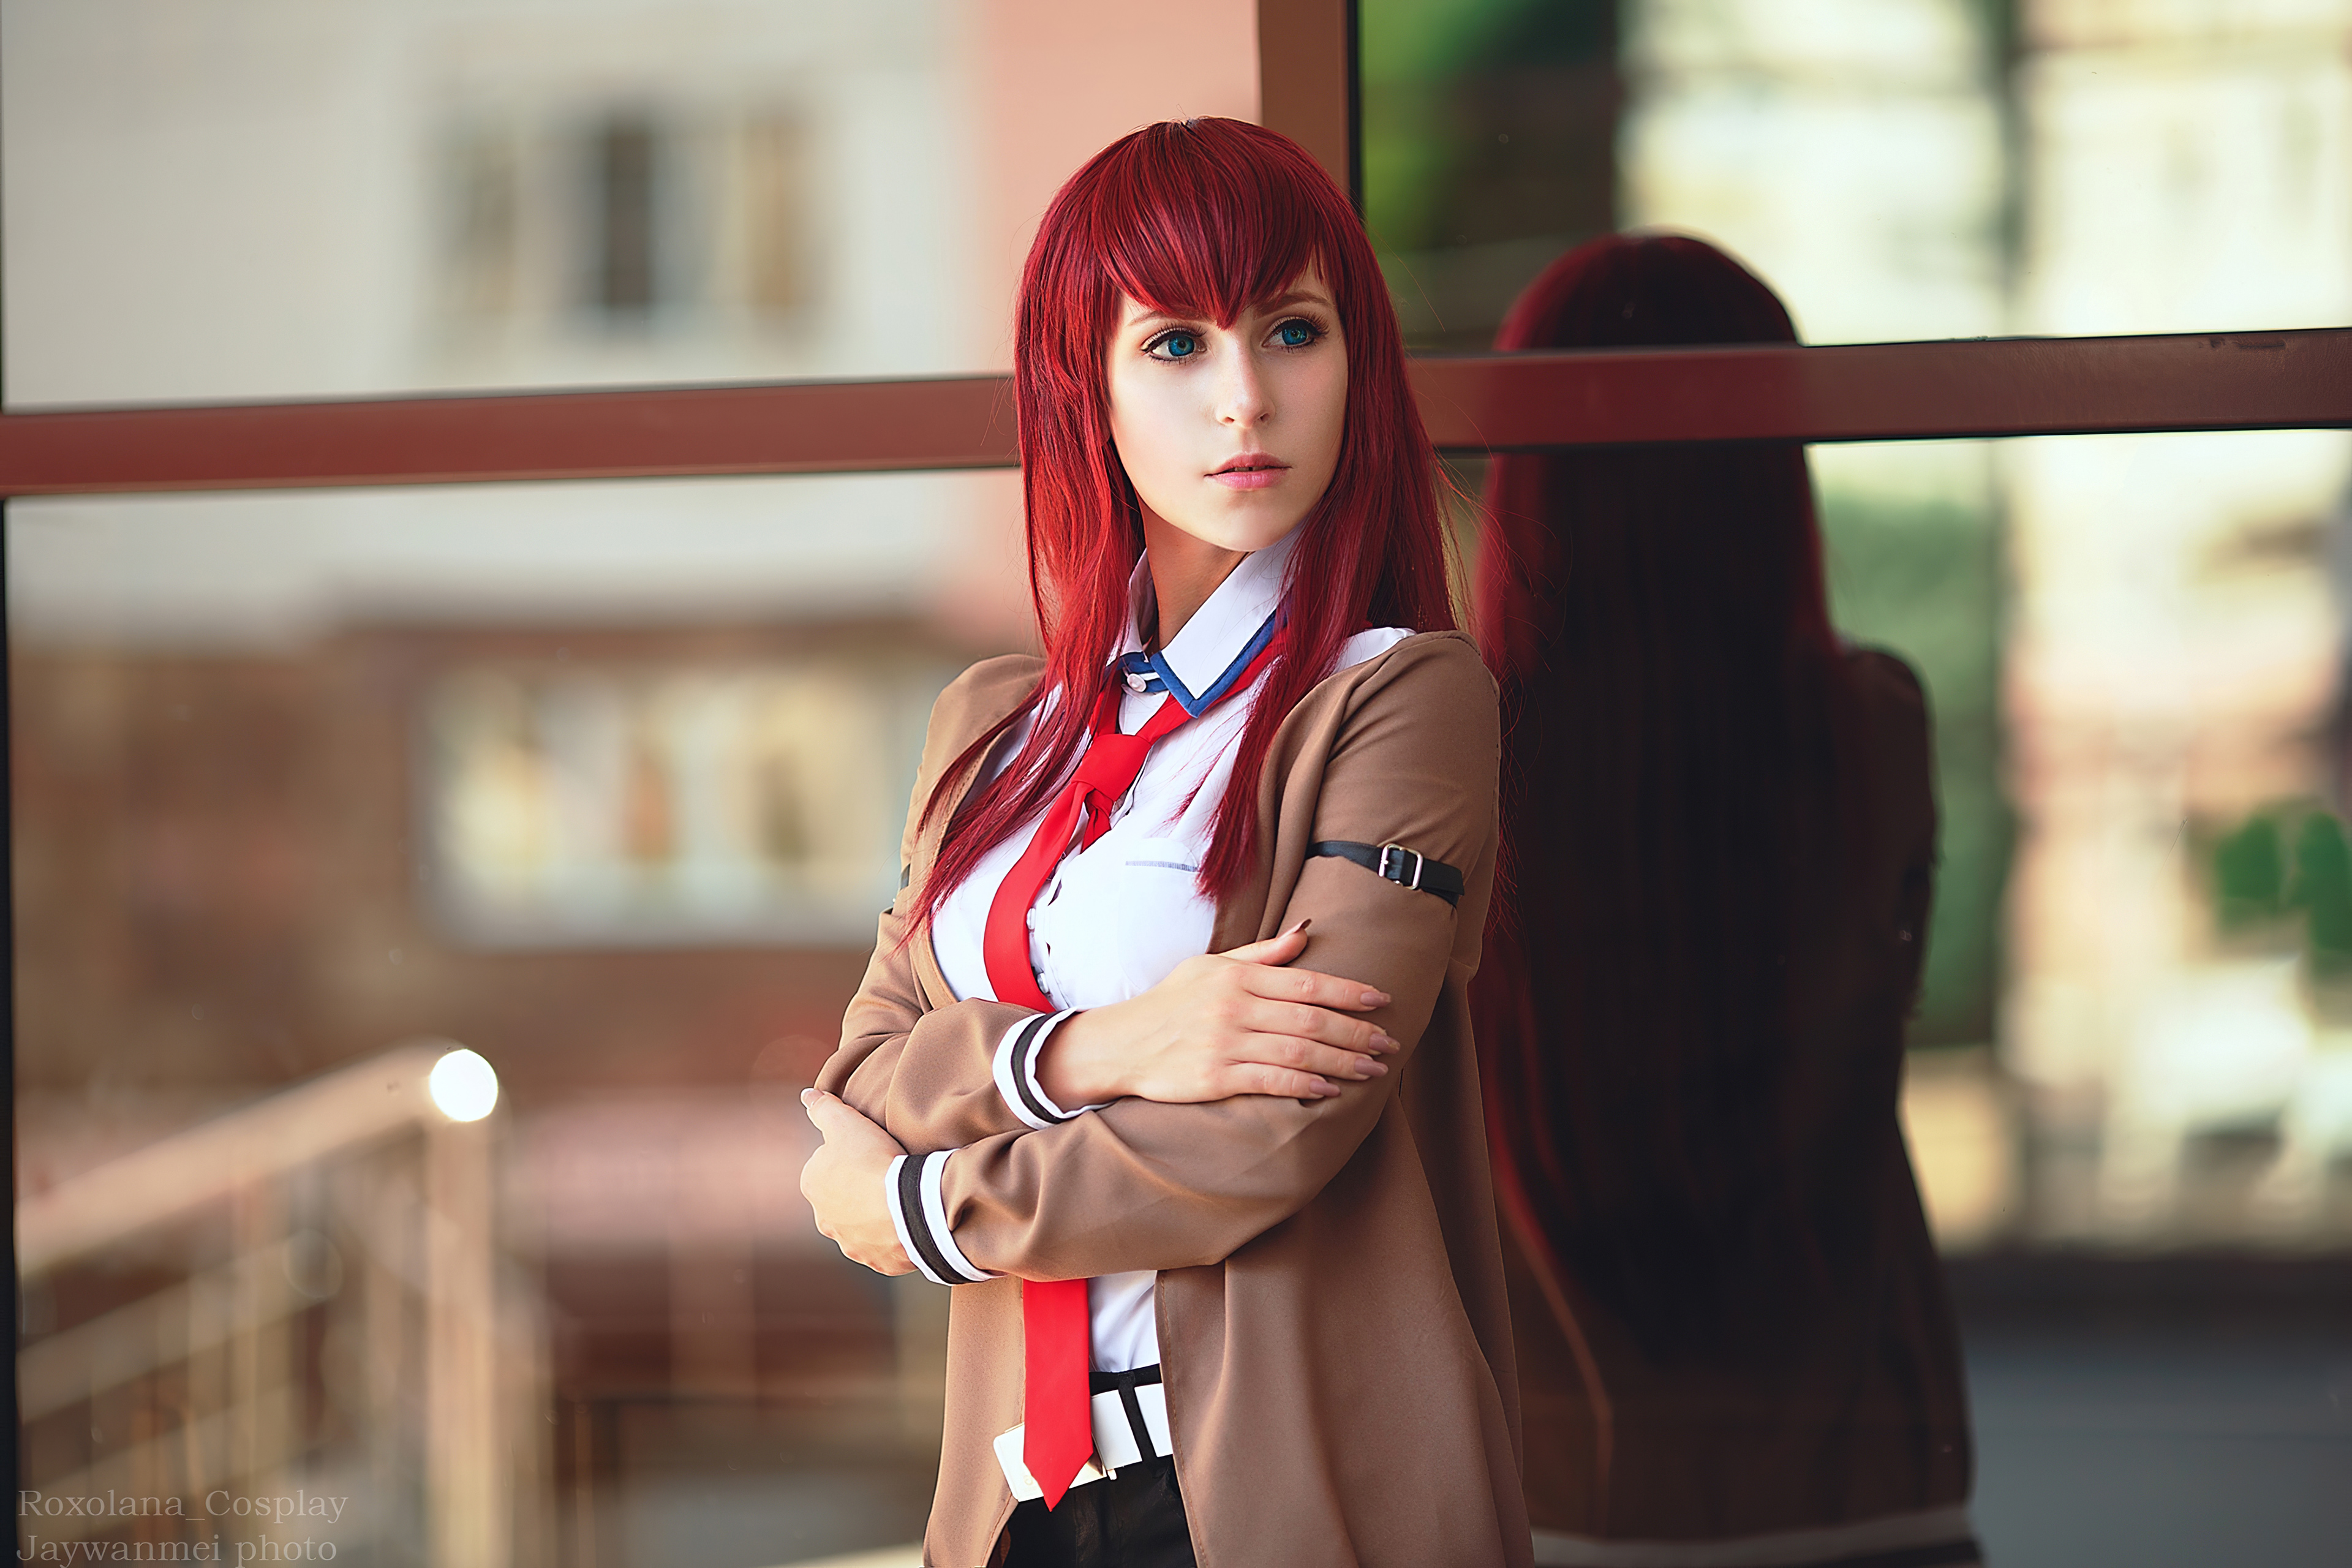 Makise kurisu anime girl cosplay k hd anime k wallpapers images backgrounds photos and pictures